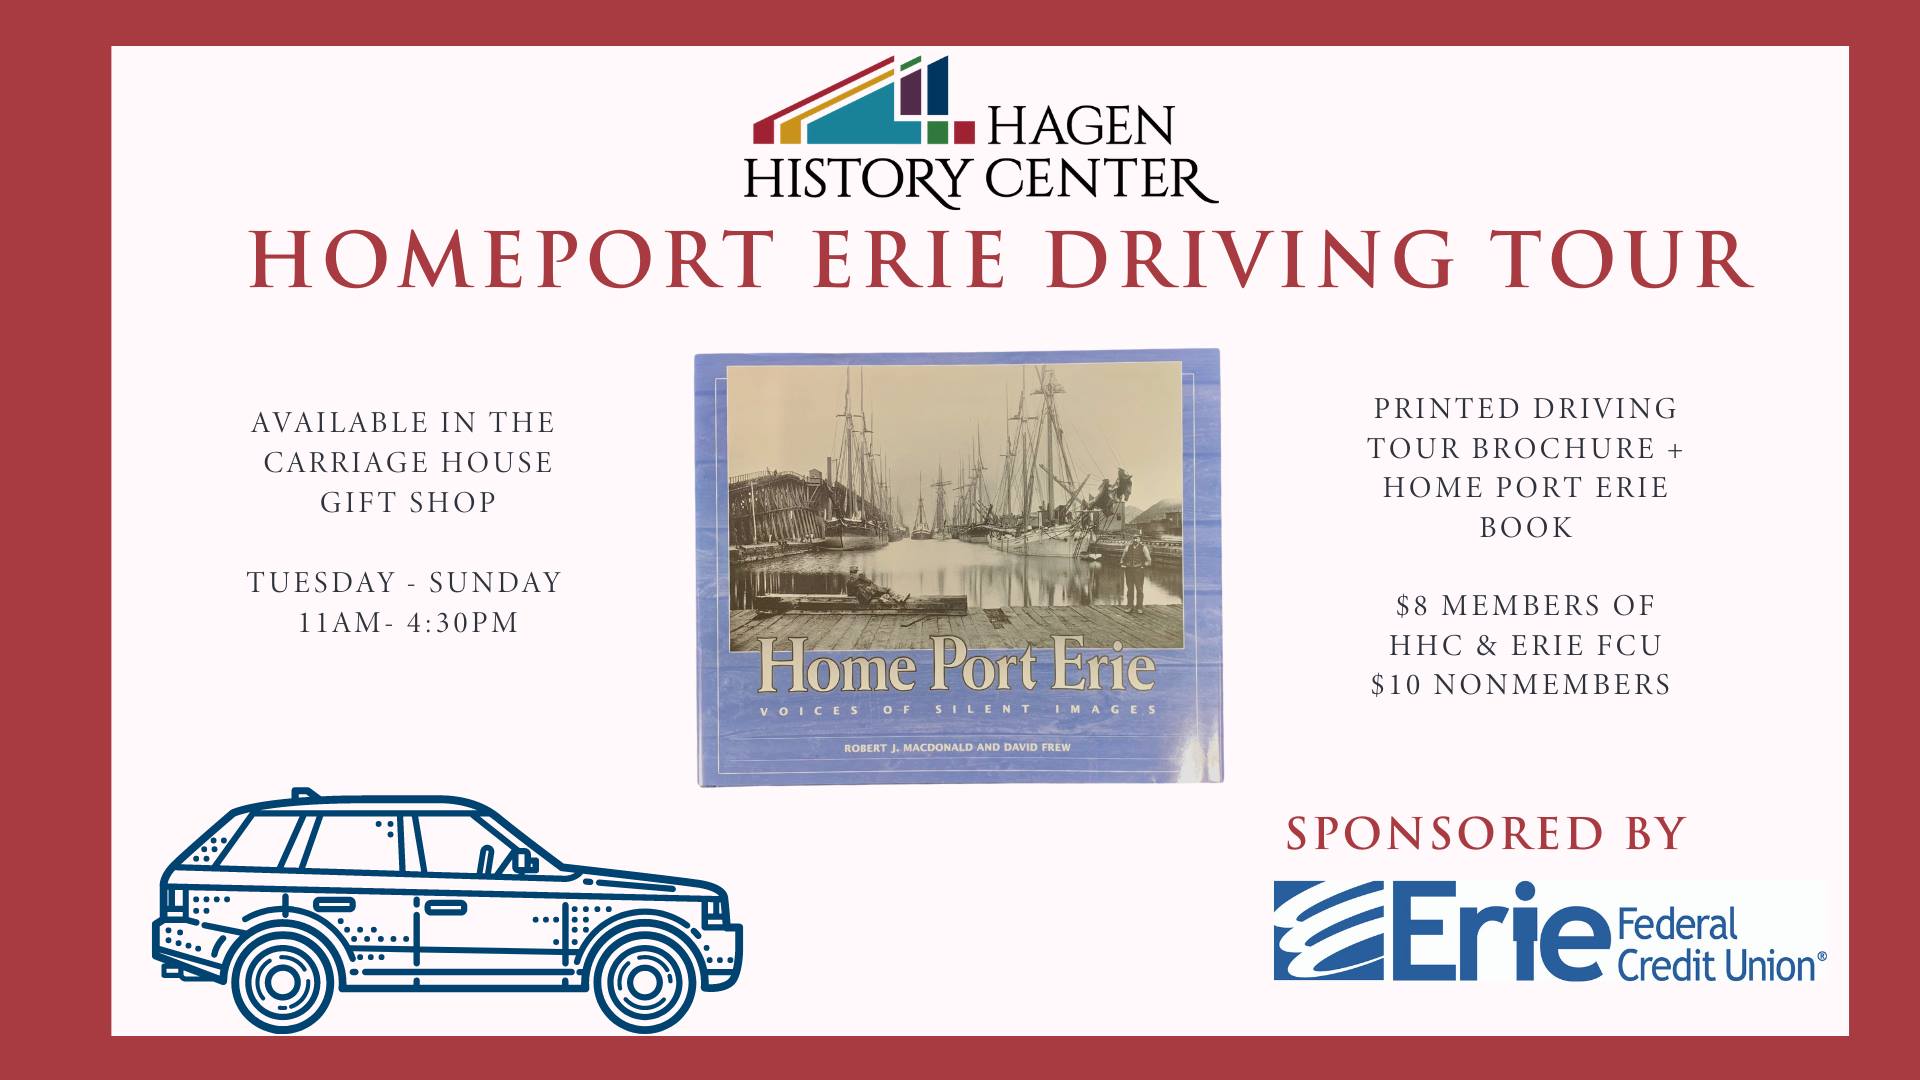 Home Port Erie Driving Tour